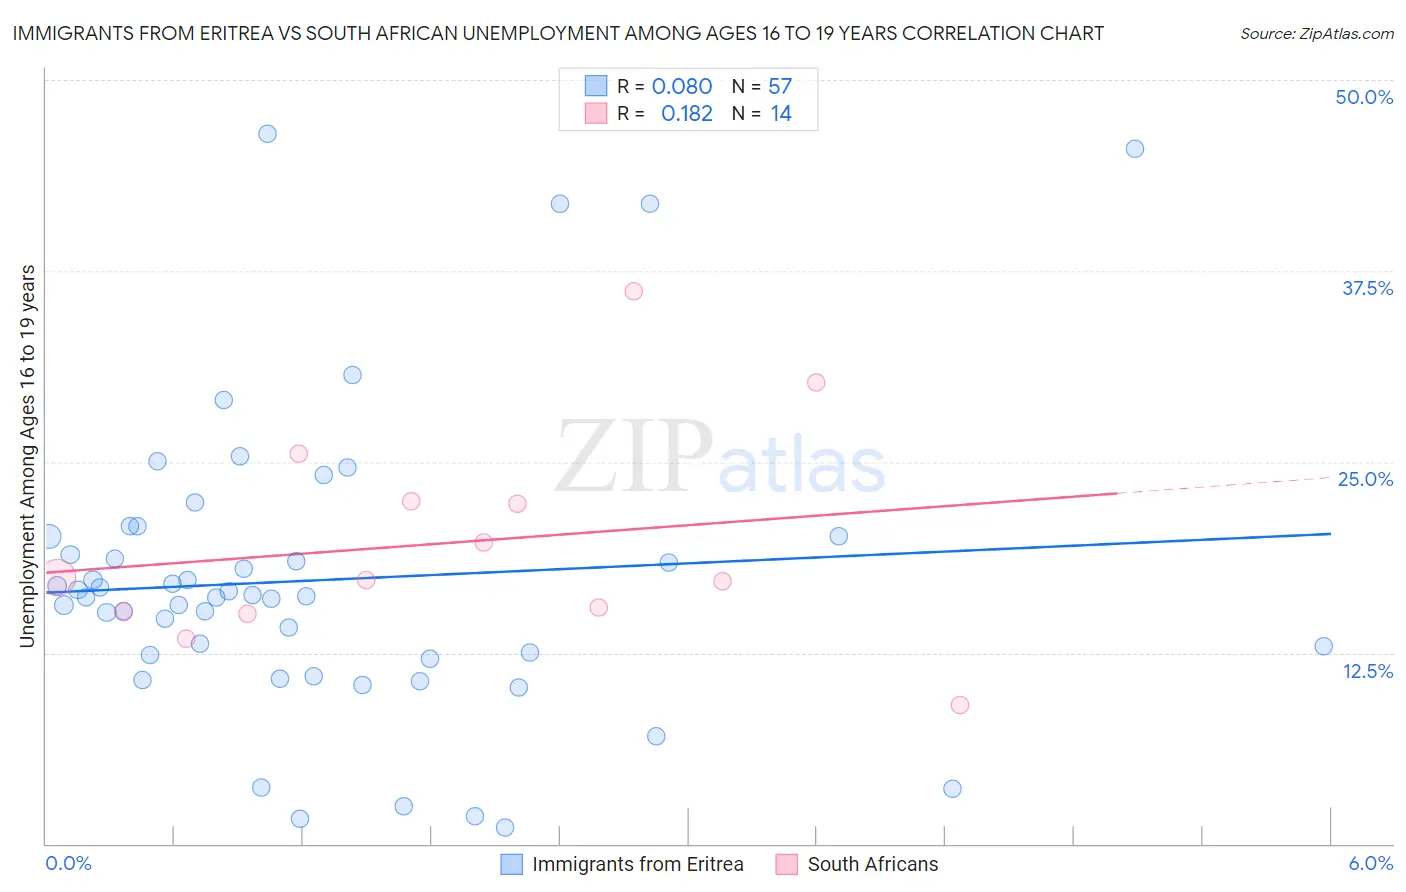 Immigrants from Eritrea vs South African Unemployment Among Ages 16 to 19 years